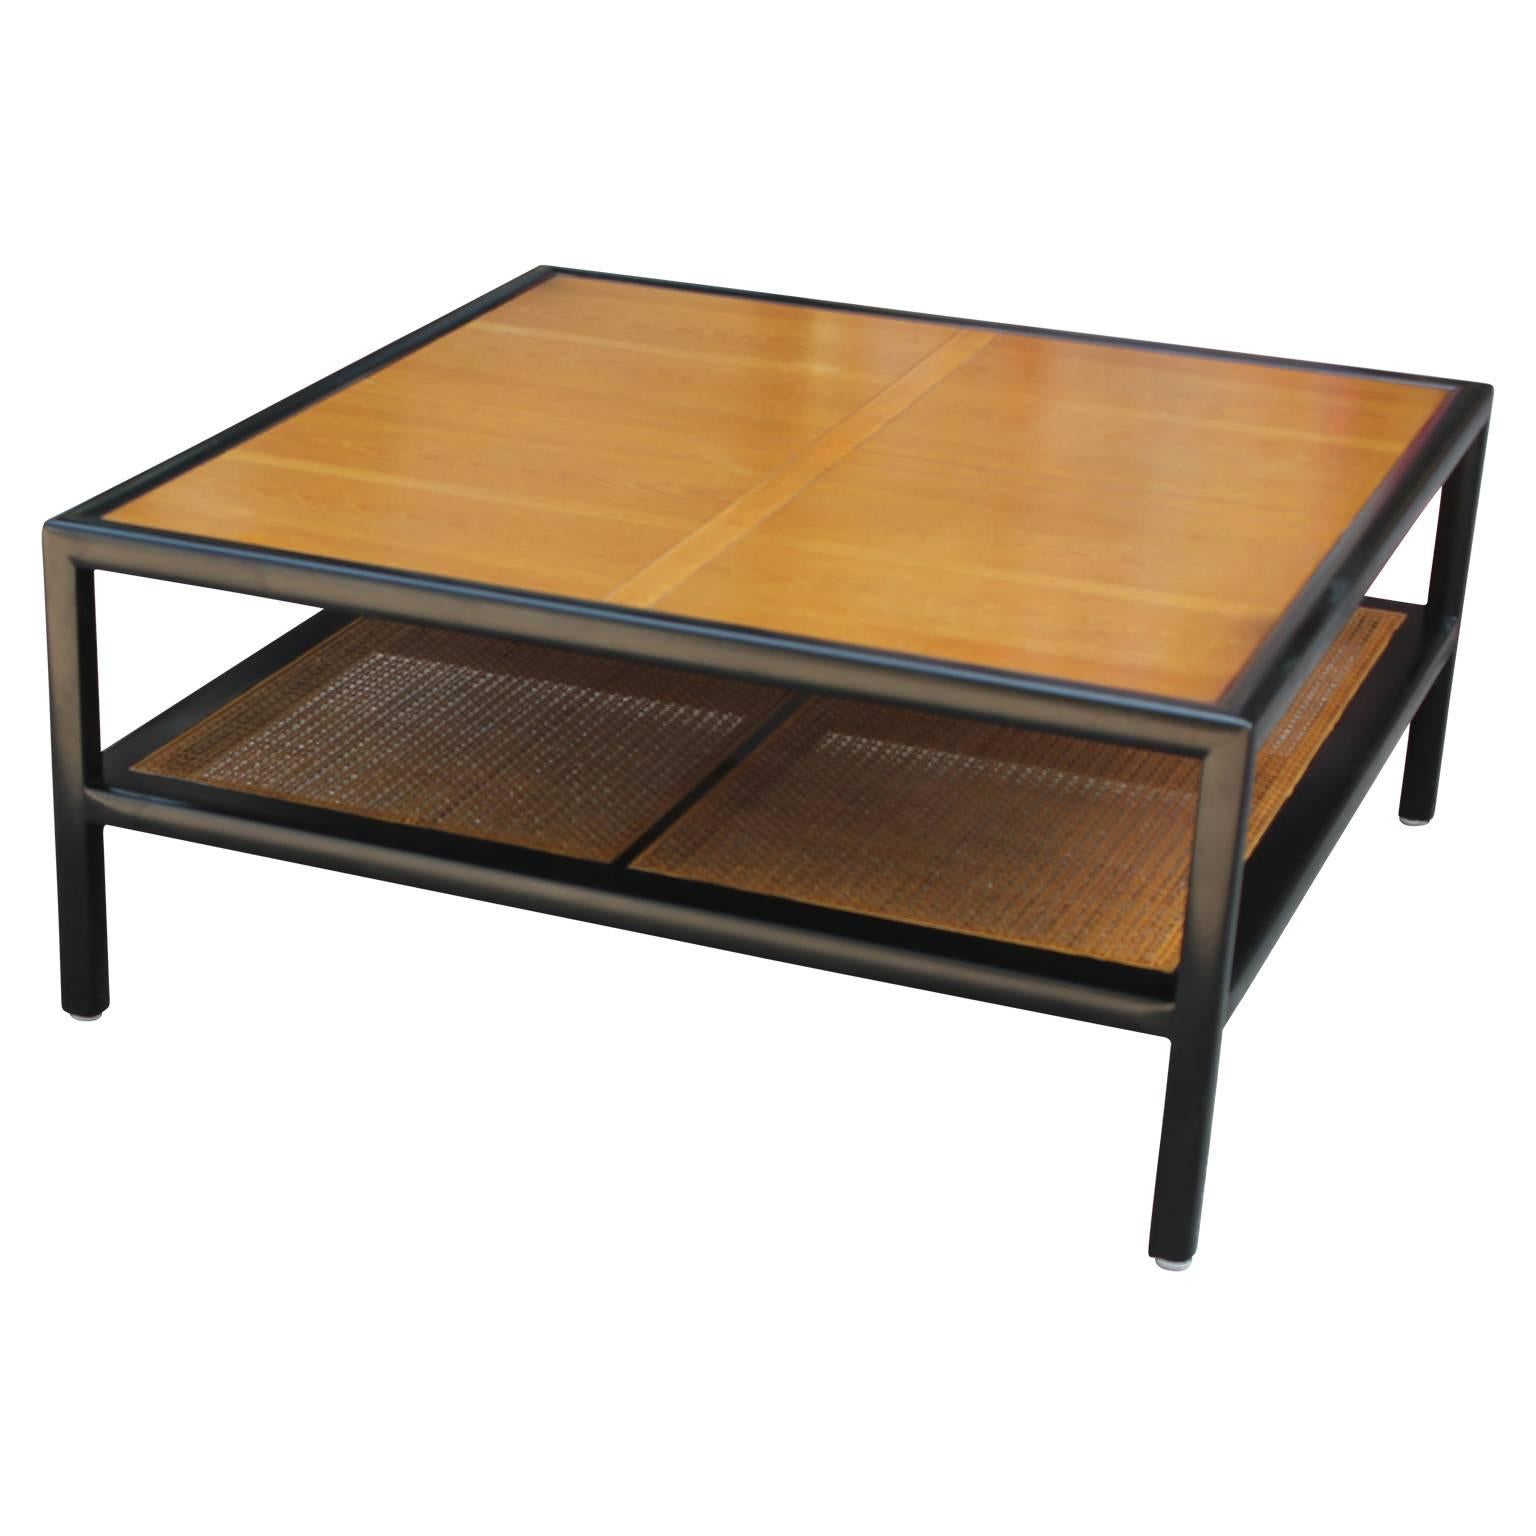 Unique two-tone coffee table by Michael Taylor for Baker Furniture Co. with a woven cane shelf as part of their New World Group line.